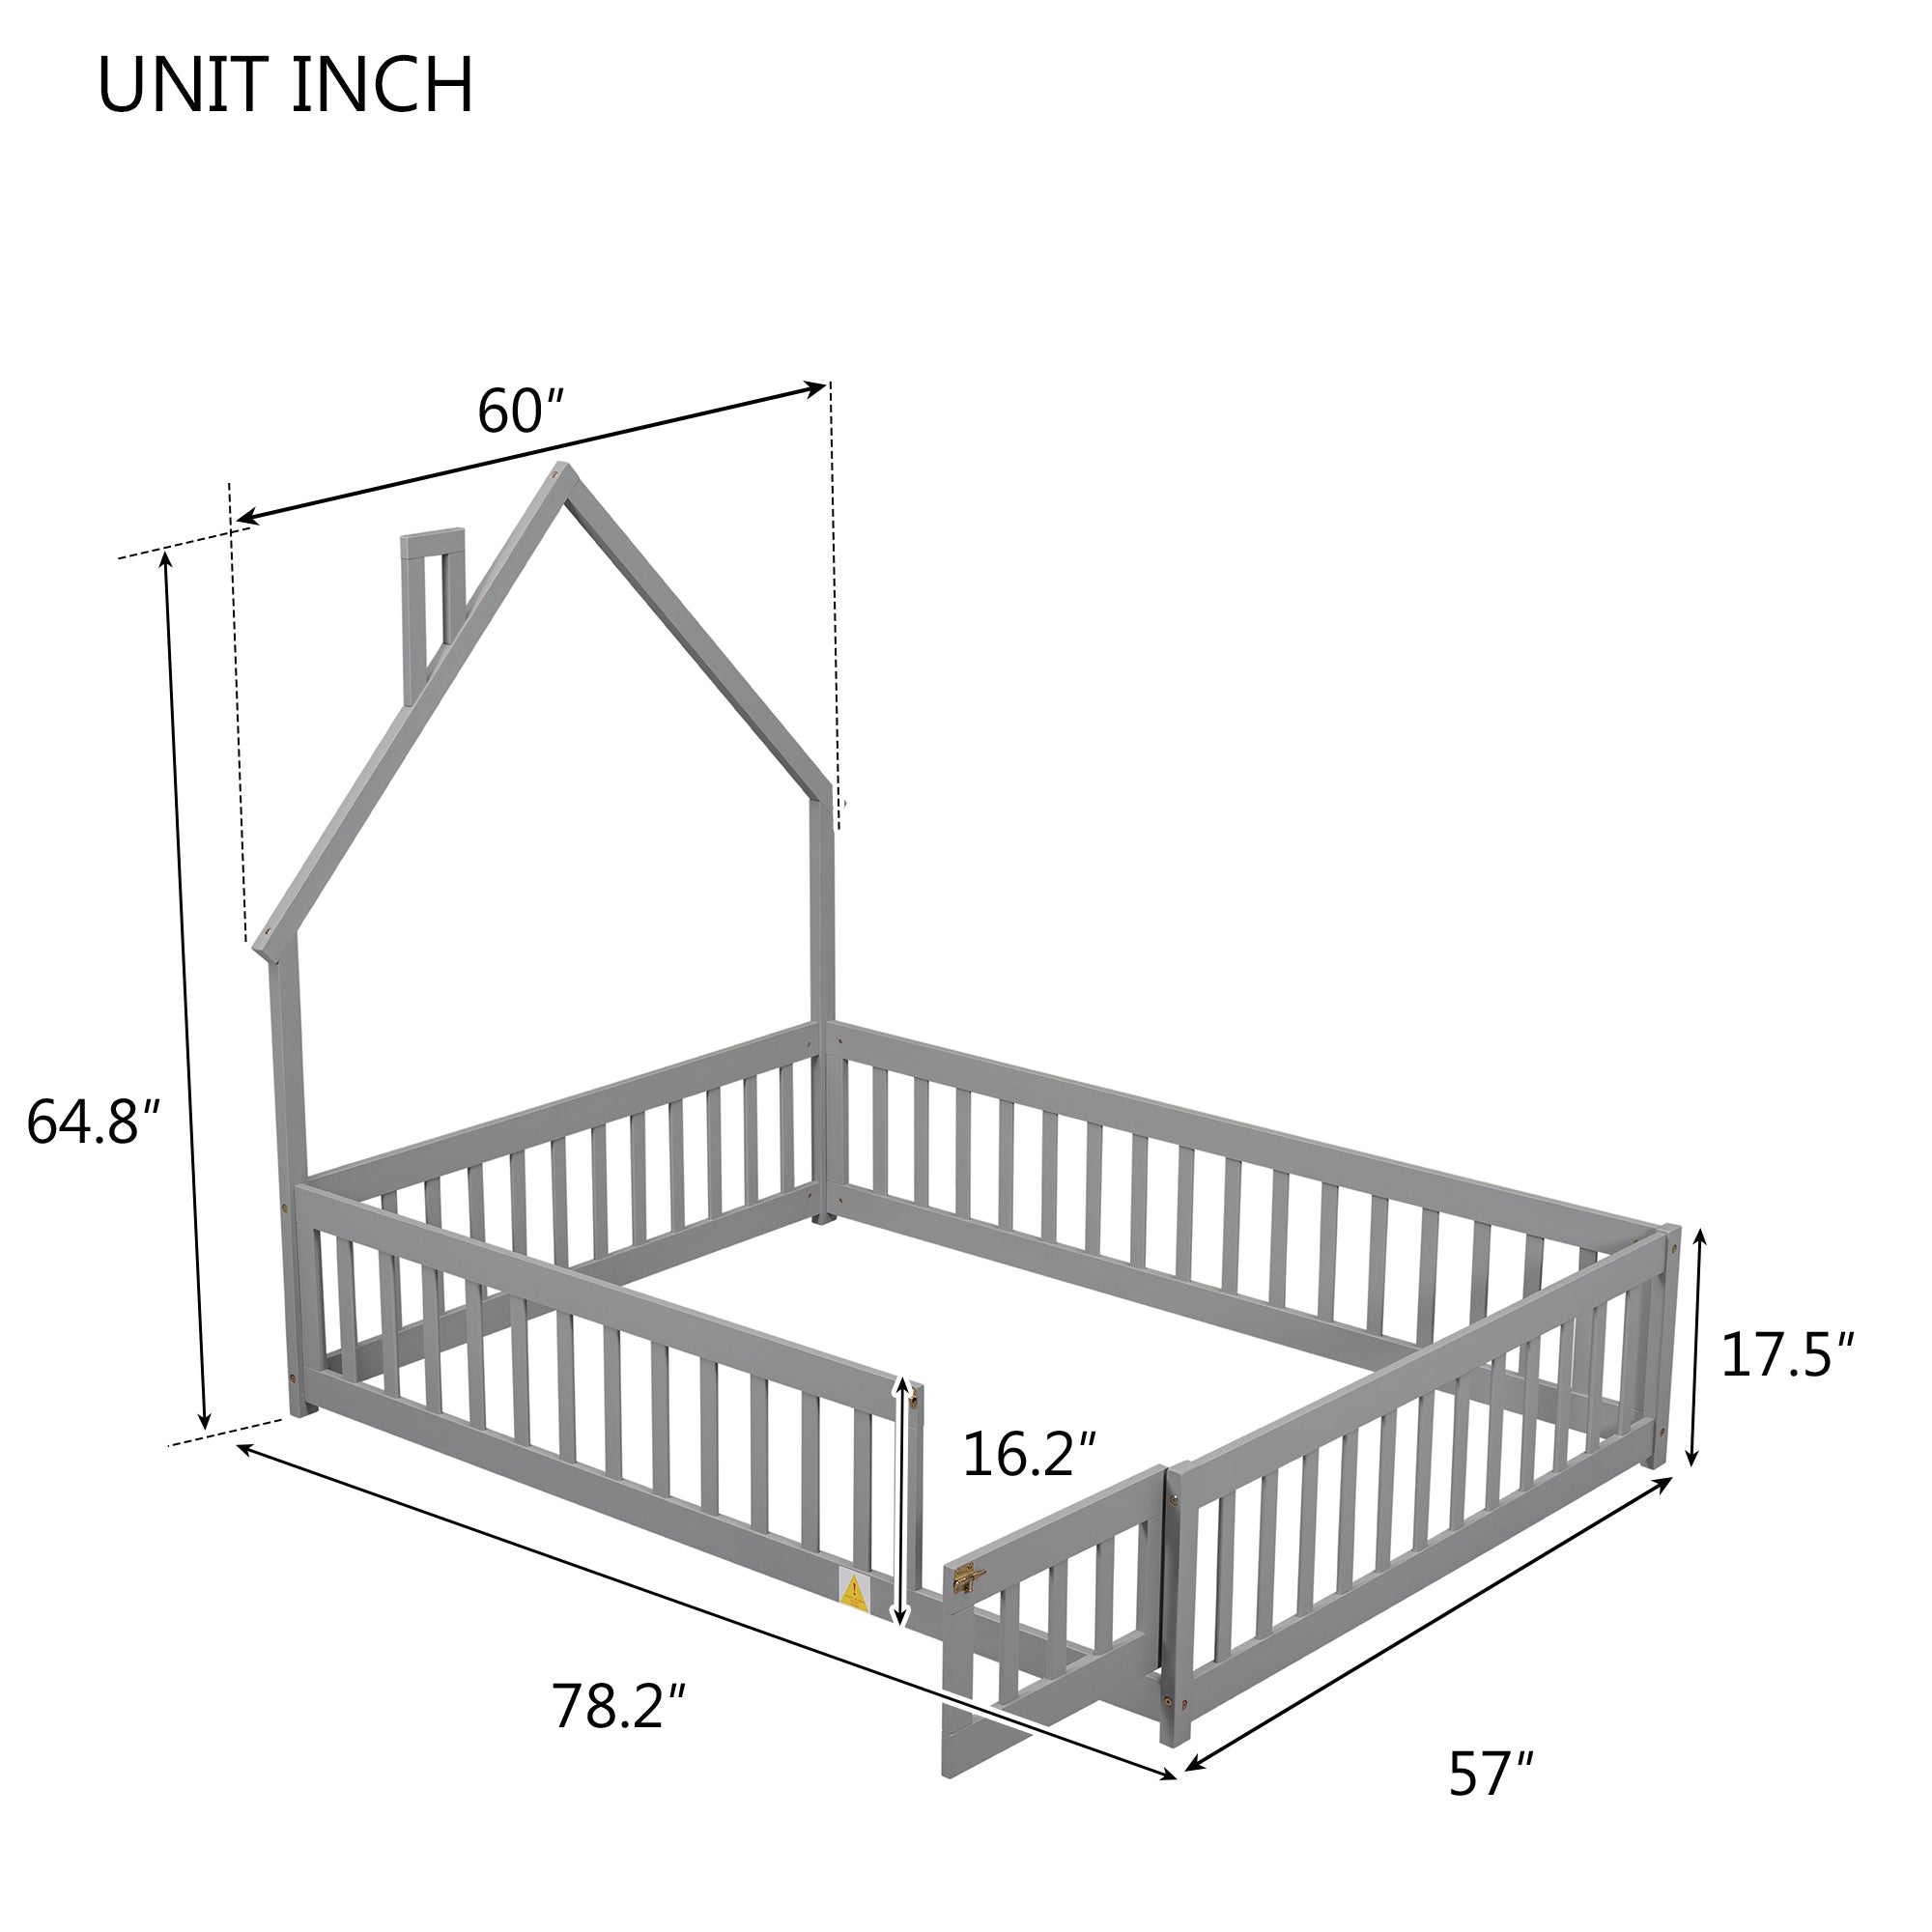 Full House-Shaped Headboard Floor Bed with Fence ,Grey